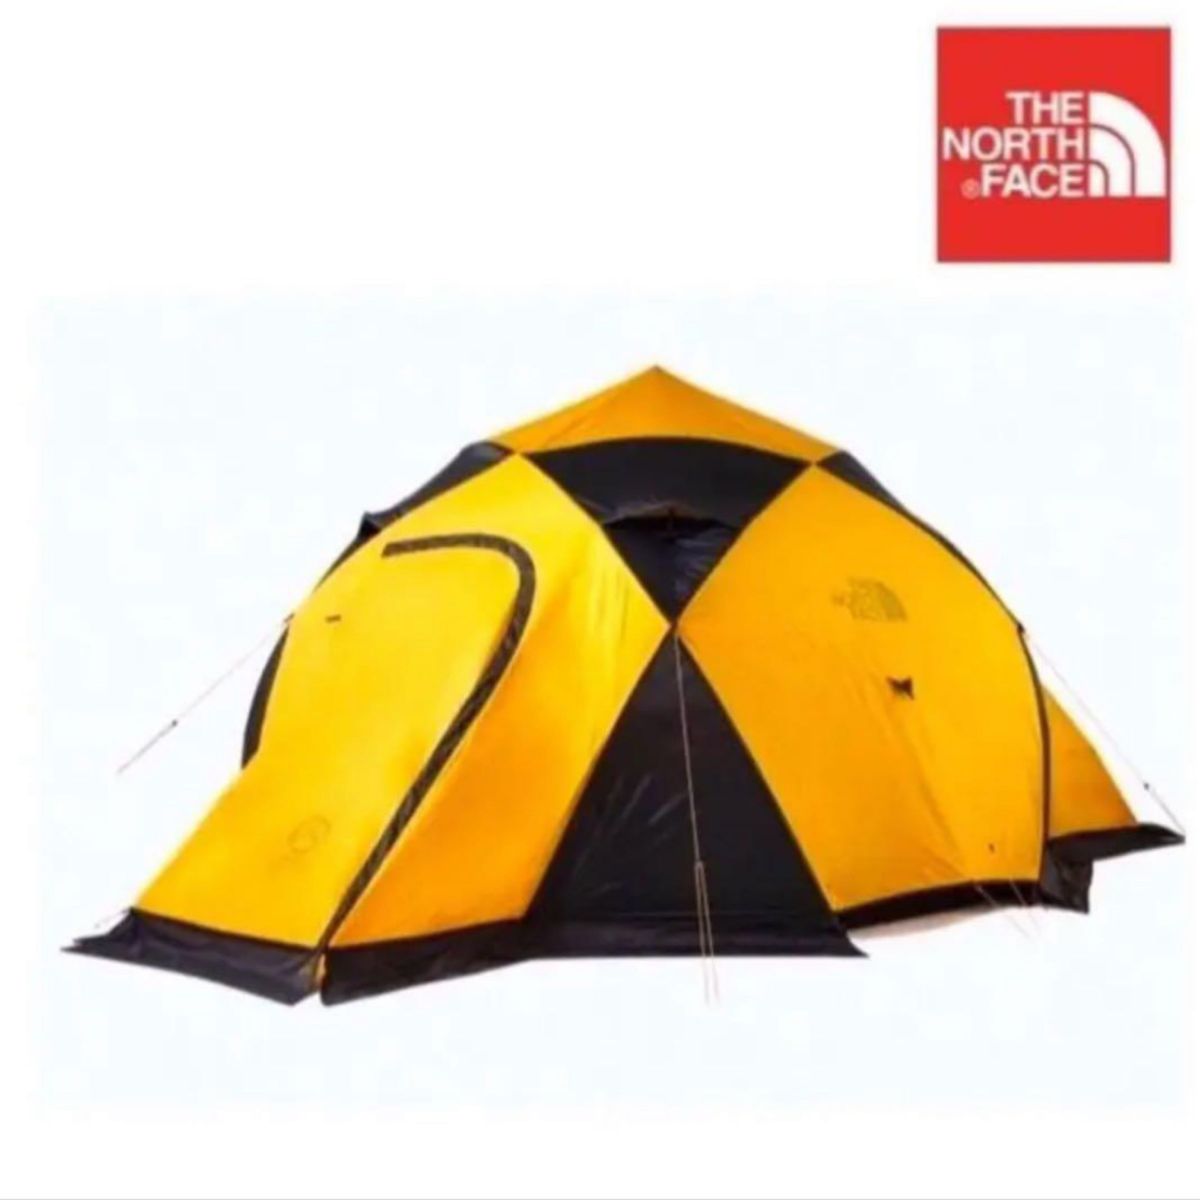 The North Face DOME5 テント 新品未使用 ドーム5